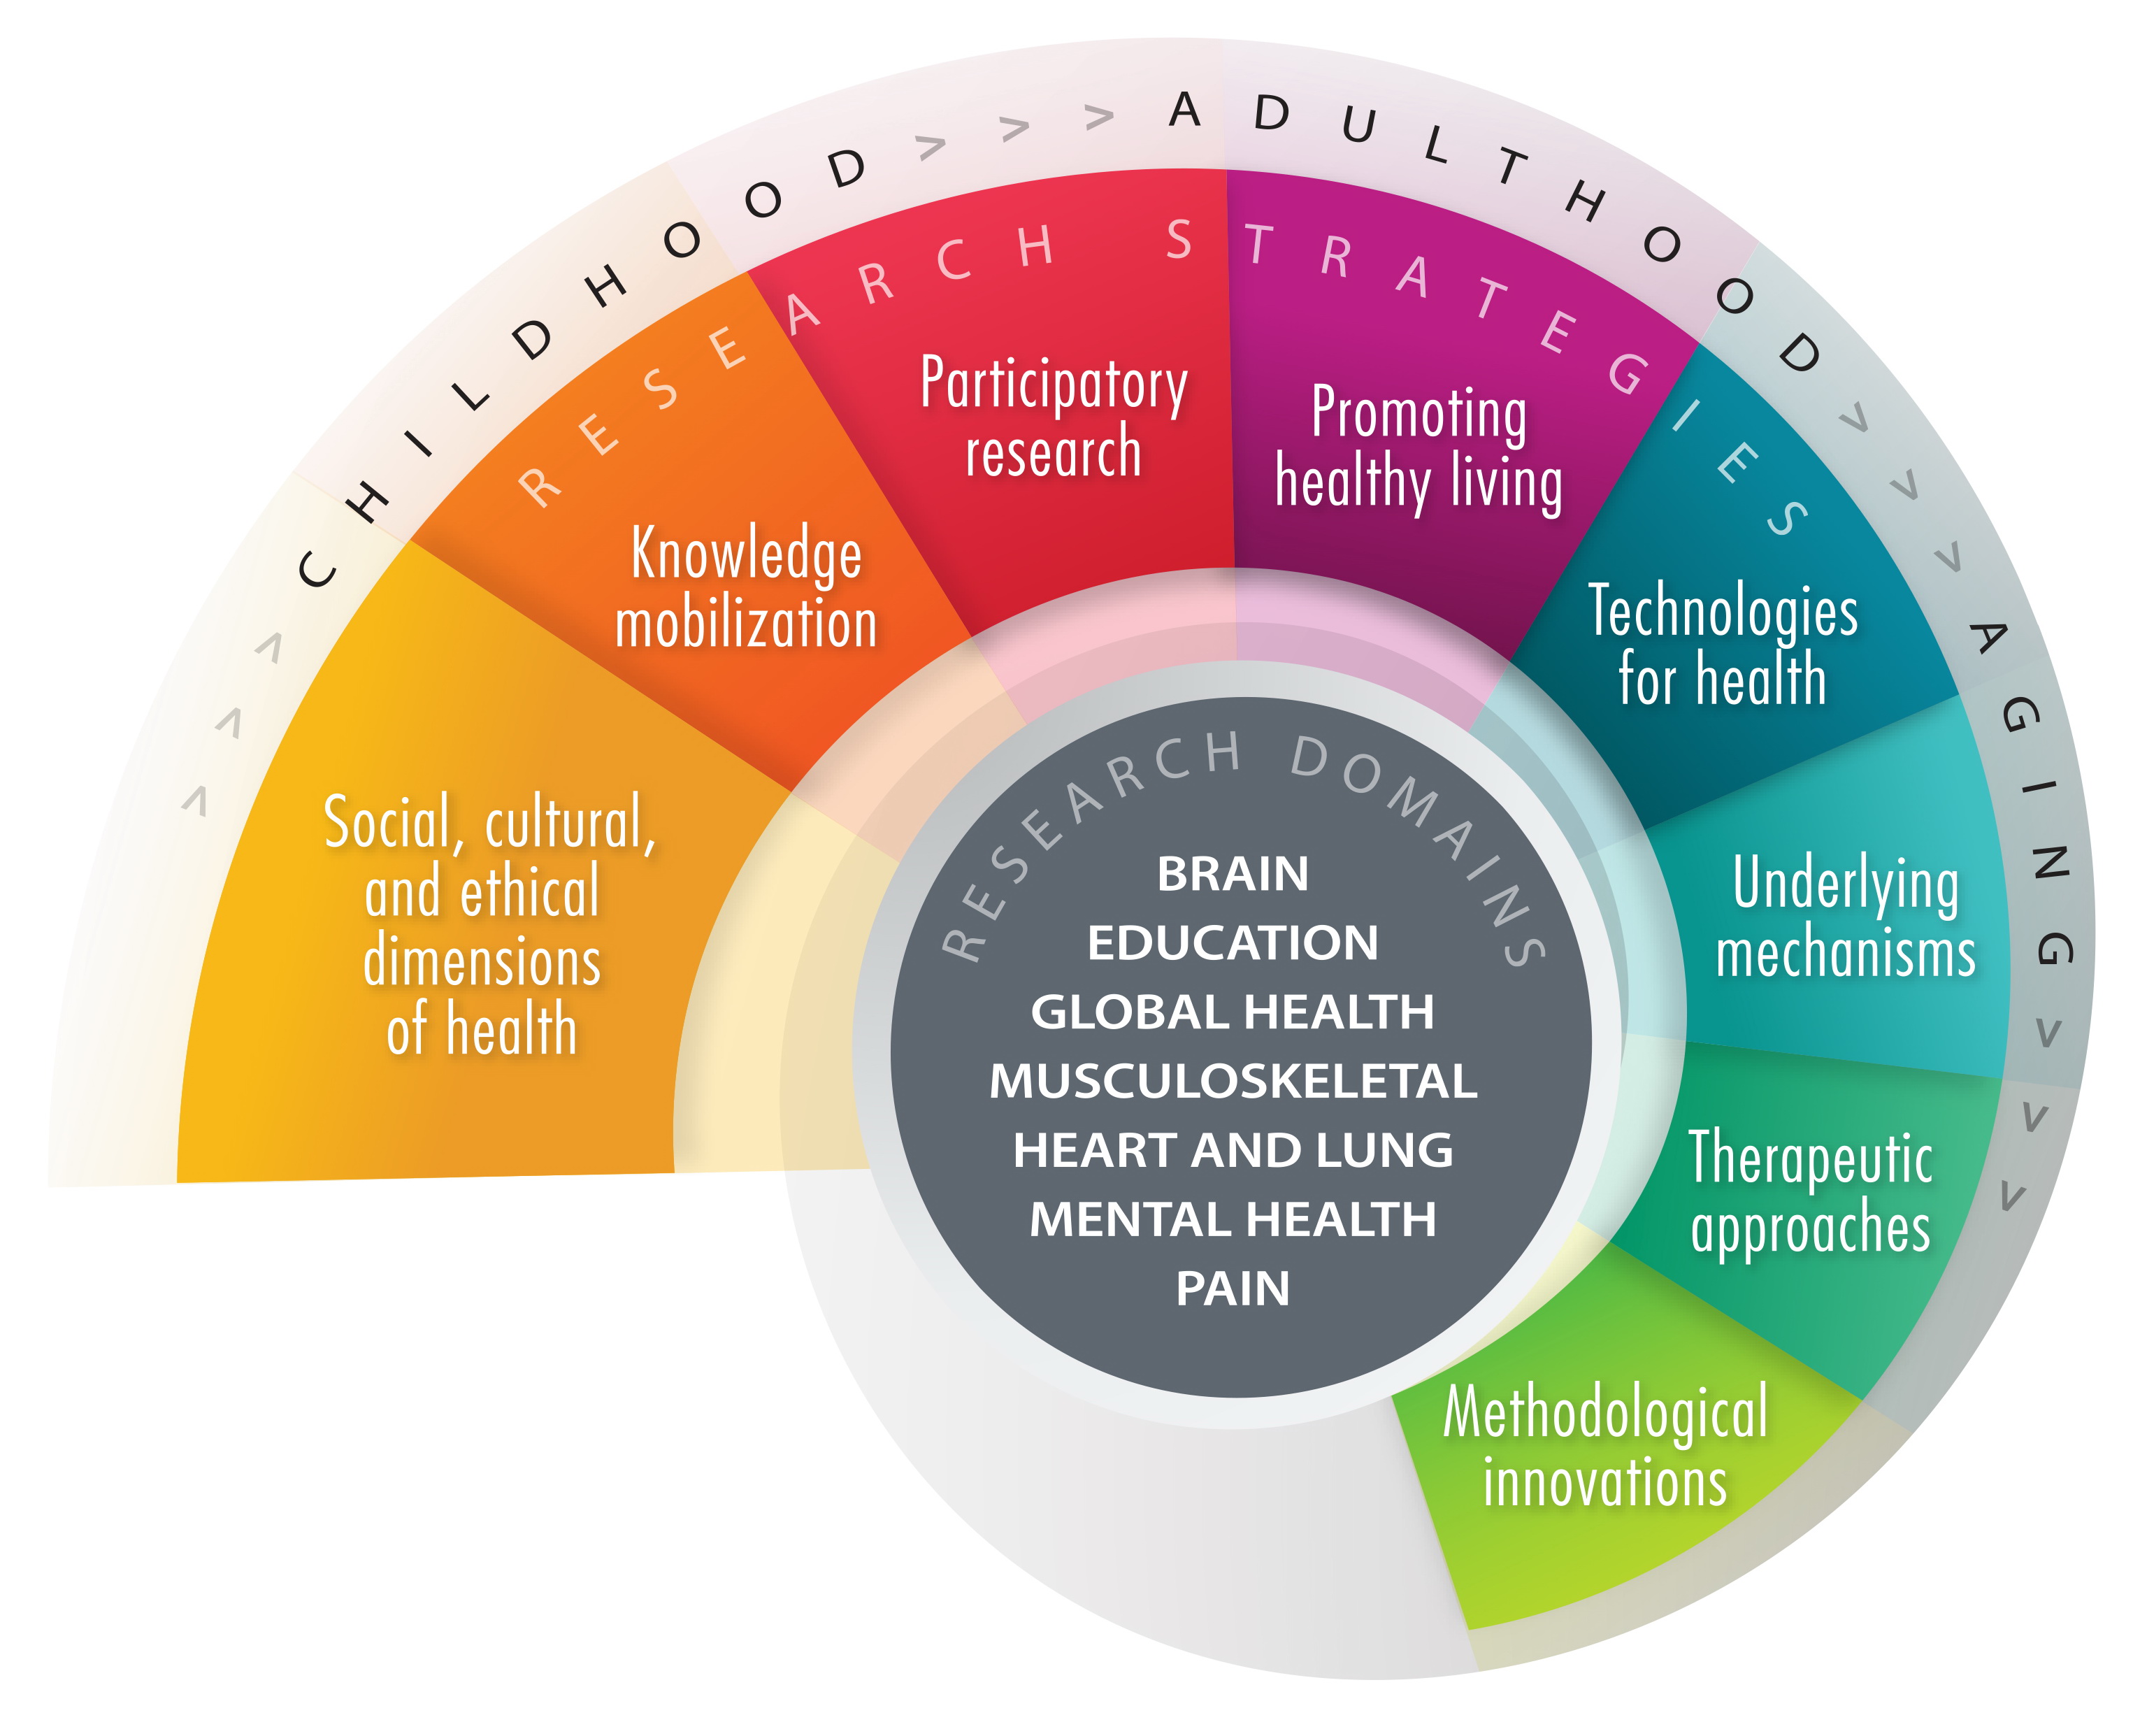 A helical image with text in the middle hub, in the next outer layer and then a final thin layer on the outer perimeter. The central hub contains a list of seven domains of brain, education, global health, musculoskeletal, heart and lung, mental health, and pain. On the next layer, which appears to spiral and emanate from the hub, the eight research strategies are shown in separate sections, these are methodological innovations, therapeutic approaches, underlying mechanisms, technologies for health, promoting healthy living, participarory research, knowledge mobilization, and social, cultural, and ethical dimensions of health. The final outer layer contains the words childhood, adulthood and aging with slight arrows between each word, to indicate the flow across the lifespan.